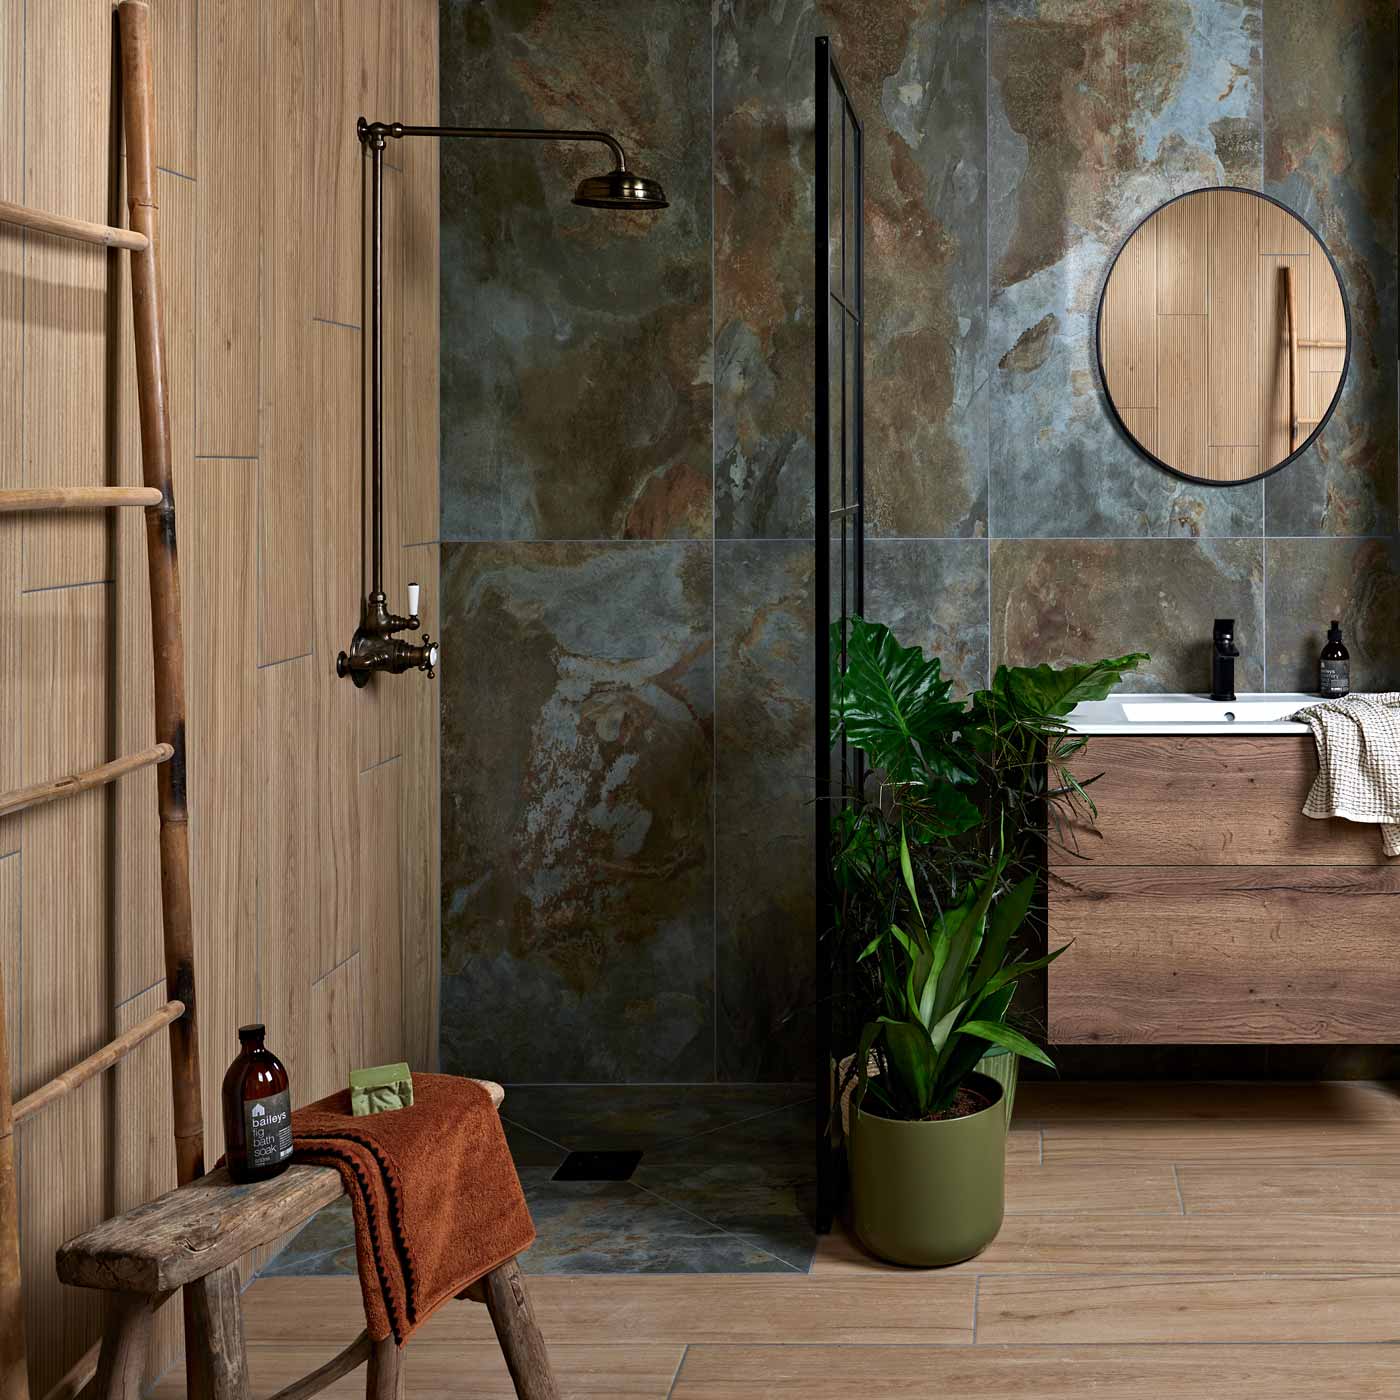 Komodo Matt Green tile 60x120cm in a bathroom setting. Wood effect tiles in a black metal shower, wooden vanity unit with white rectangular sink. Oval shaped mirror above that. Wood effect tiles on the floor, with green potted floor plants, wooden long stool with toiletries and towel on.